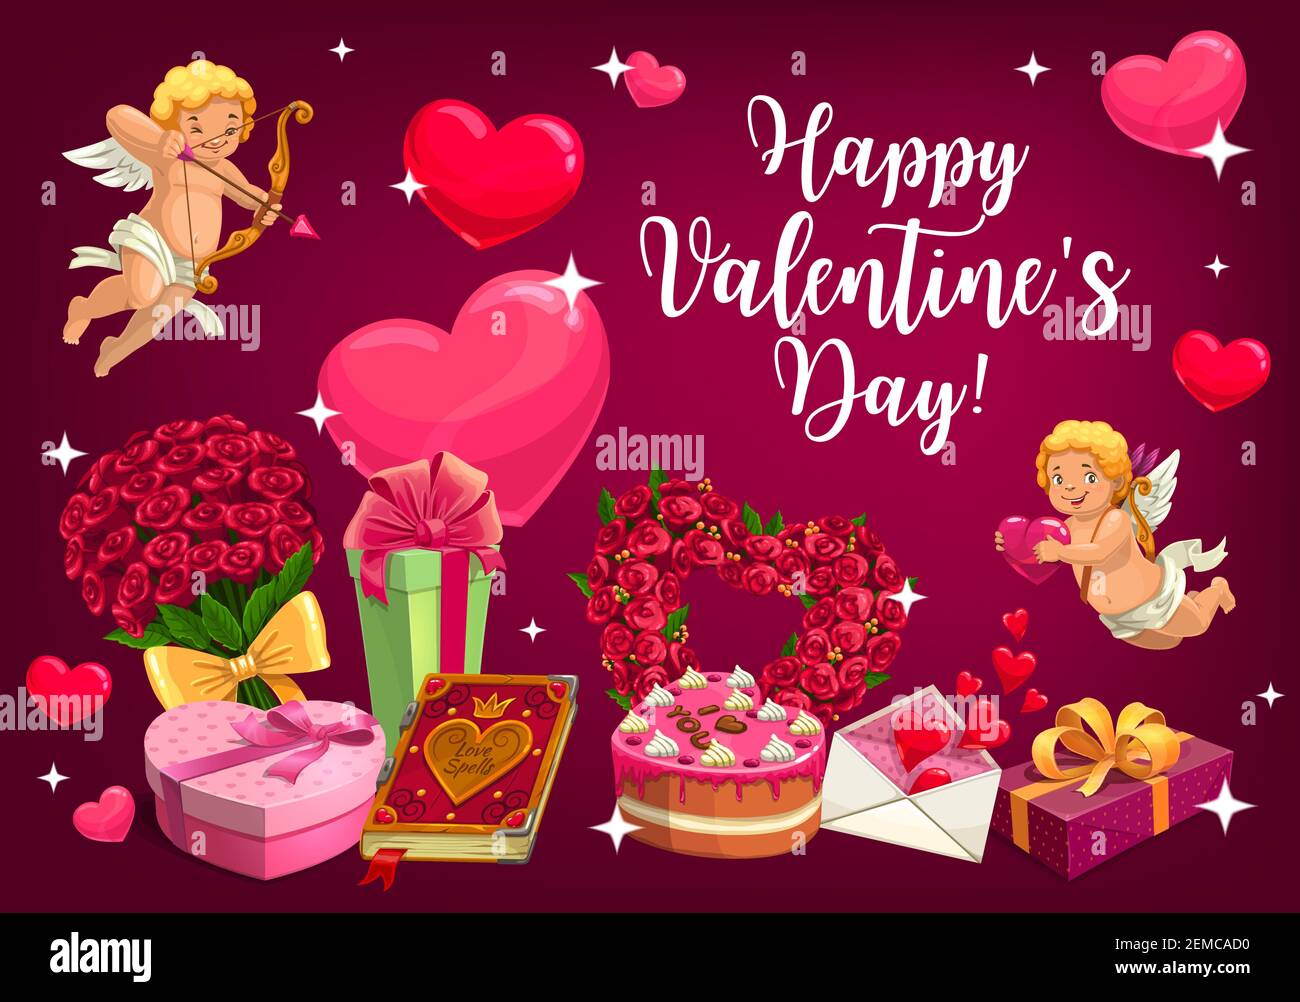 Happy Valentines day poster of cupids with golden bow arrows and ...